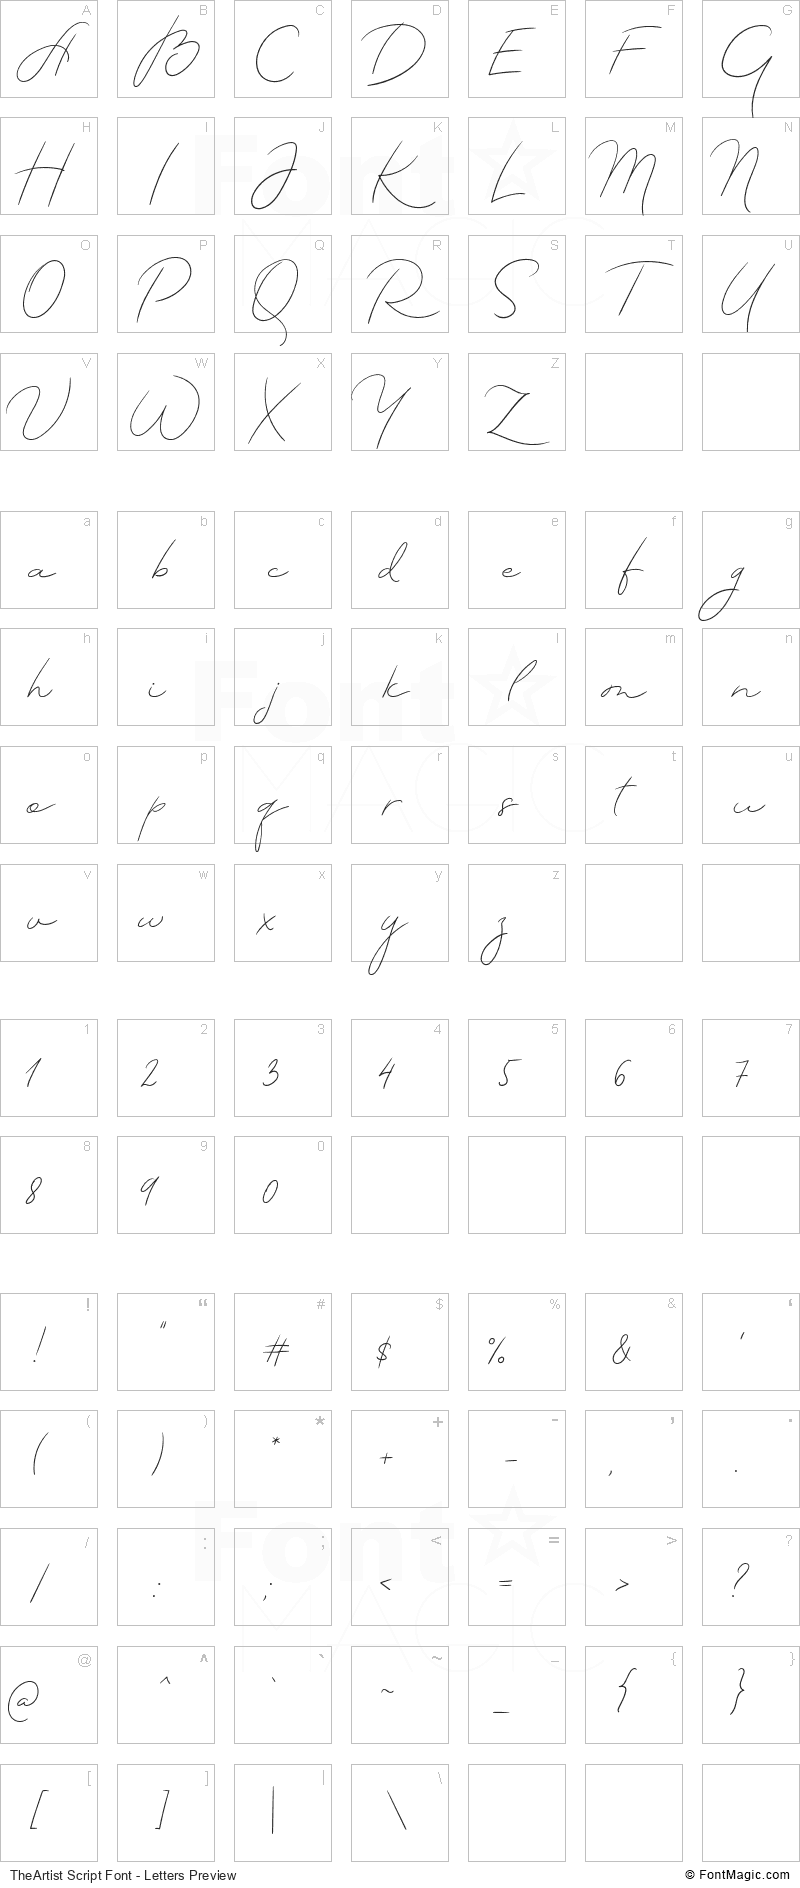 TheArtist Script Font - All Latters Preview Chart